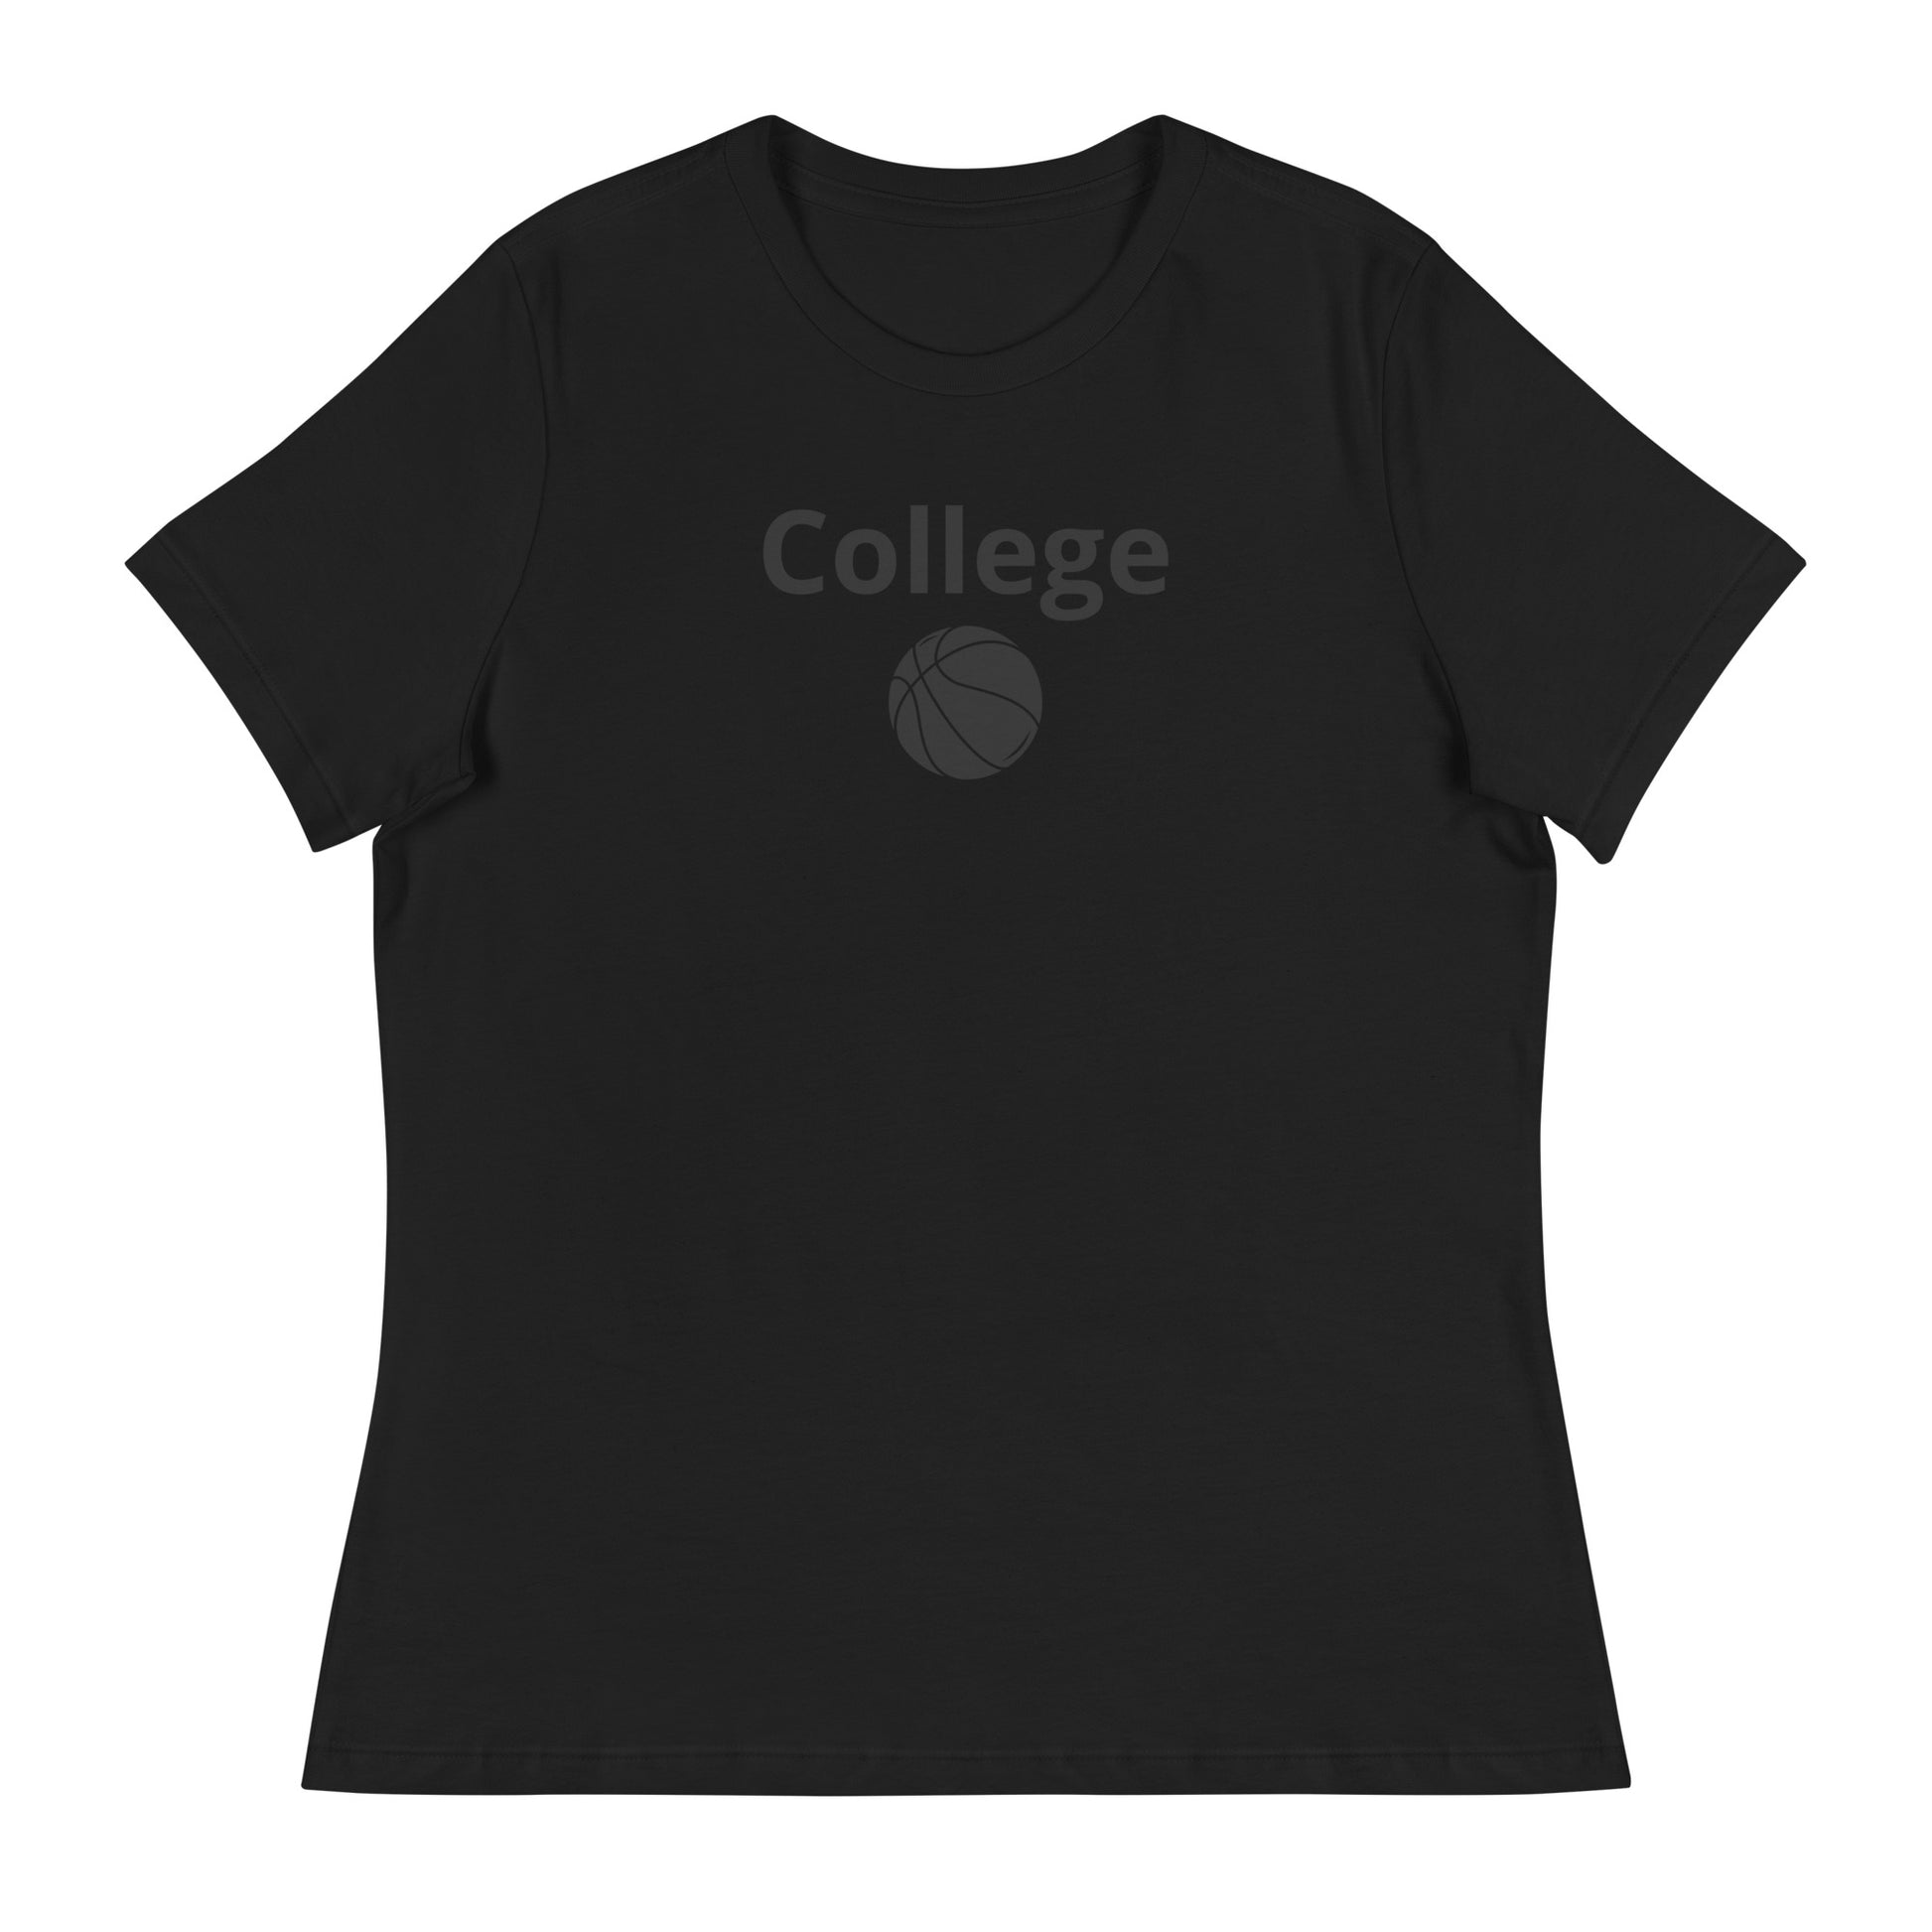 Women's college basketball graphic tee shirt in black